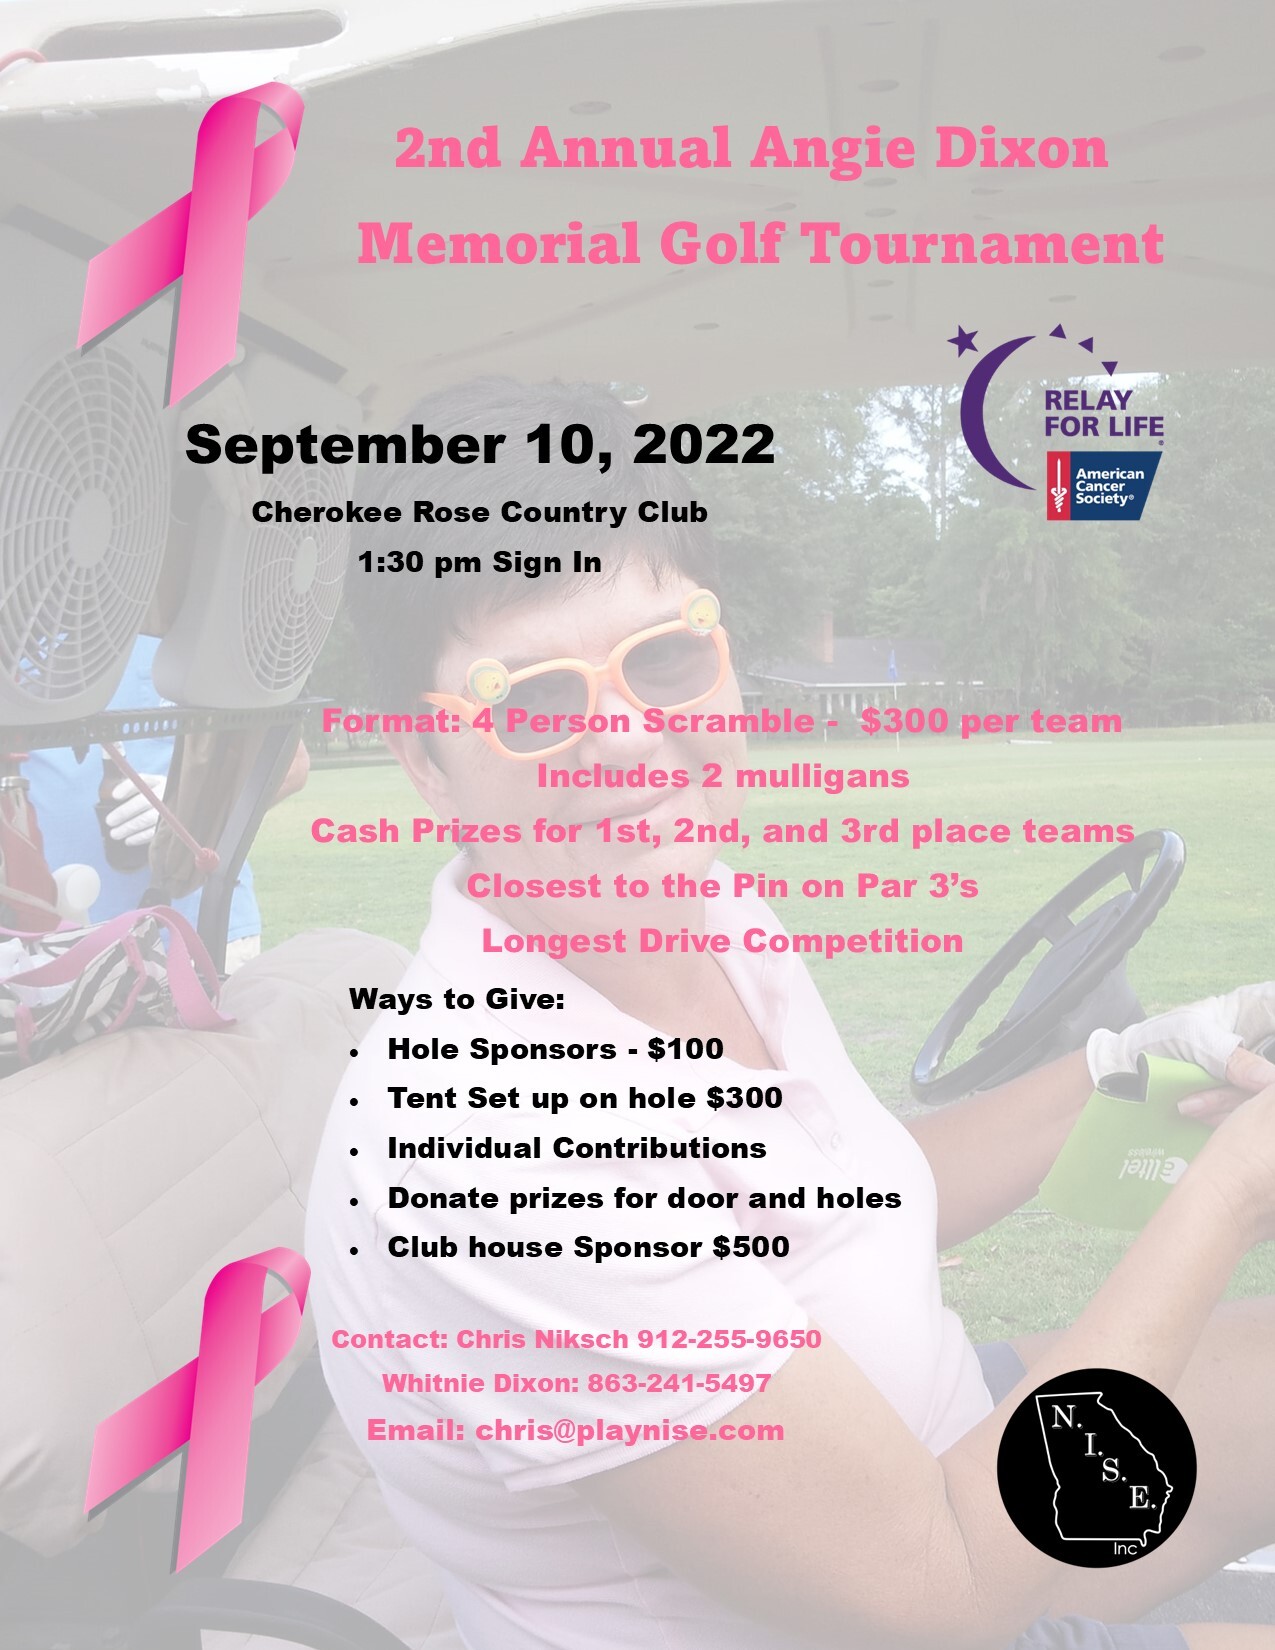 Flyer for the 2nd Annual Angie Dixon Memorial Golf Tournament